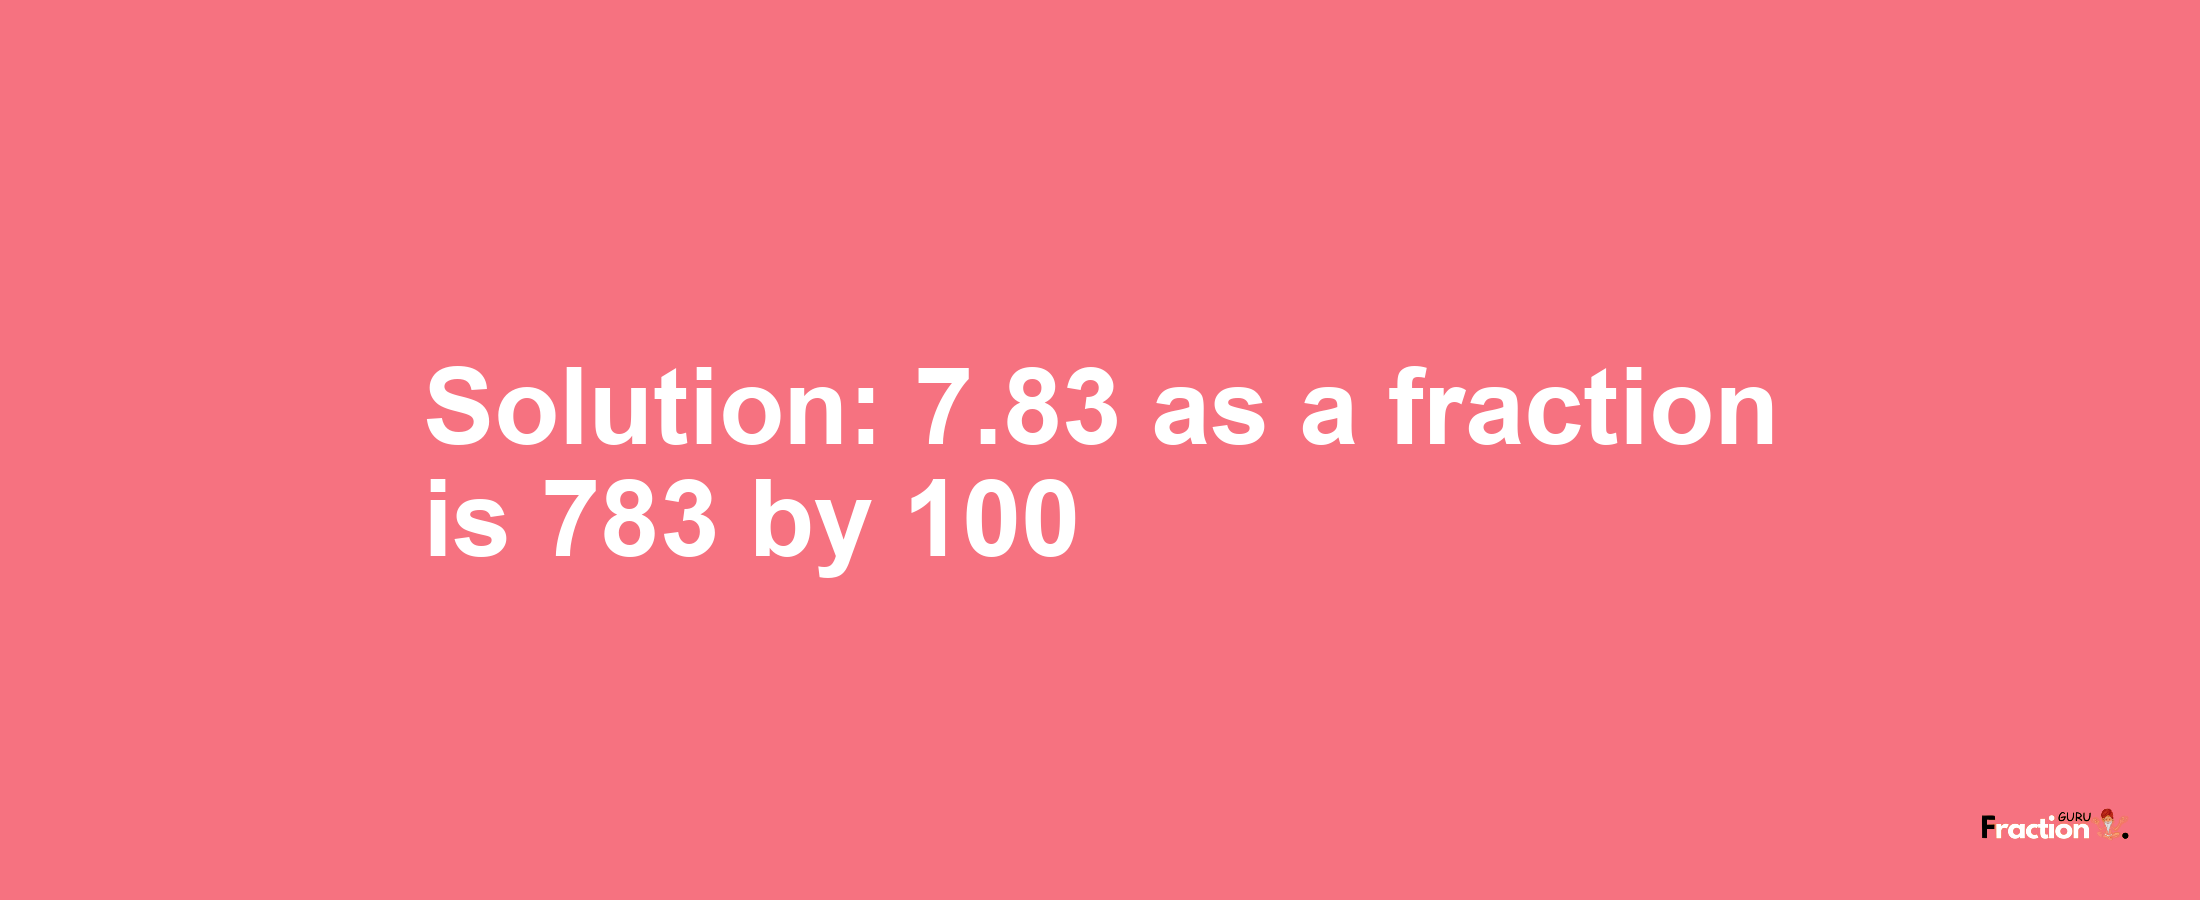 Solution:7.83 as a fraction is 783/100